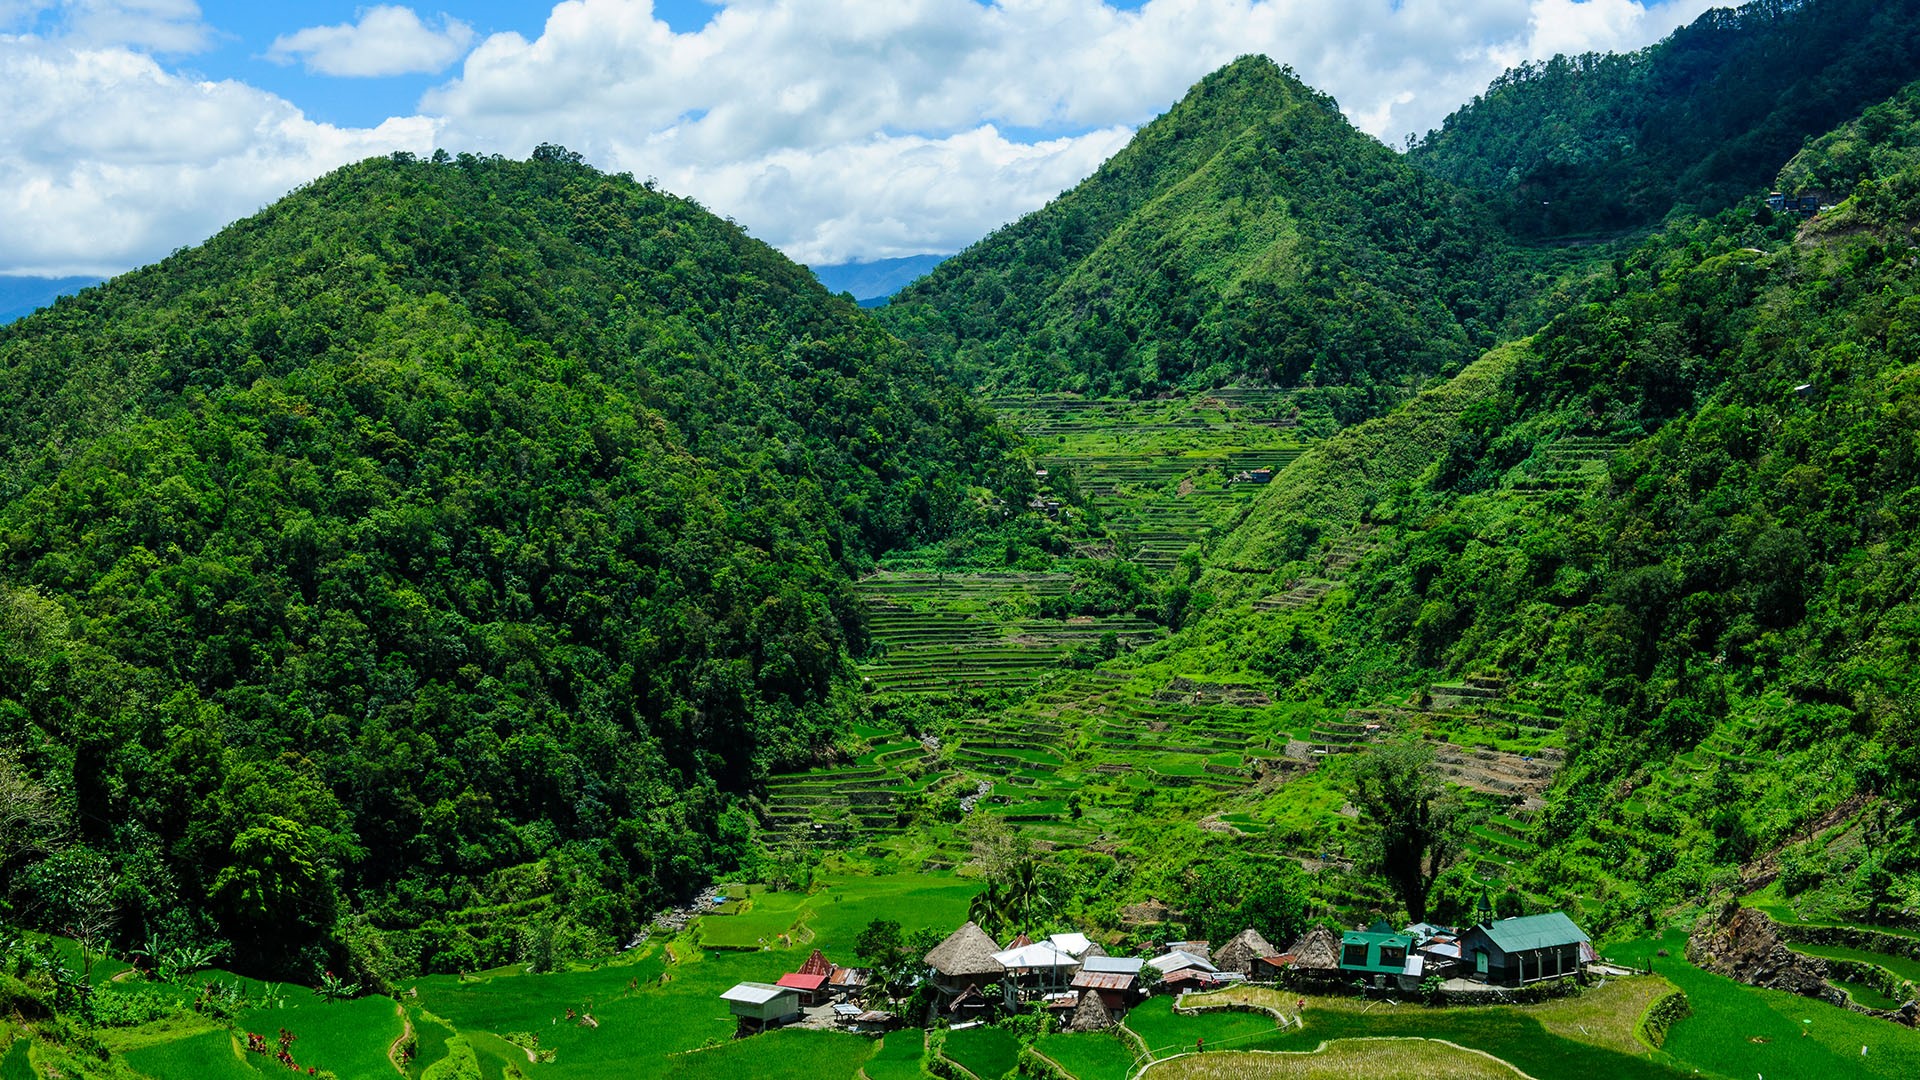 General 1920x1080 nature landscape mountains clouds sky trees farm field house rice terrace rice fields Philippines